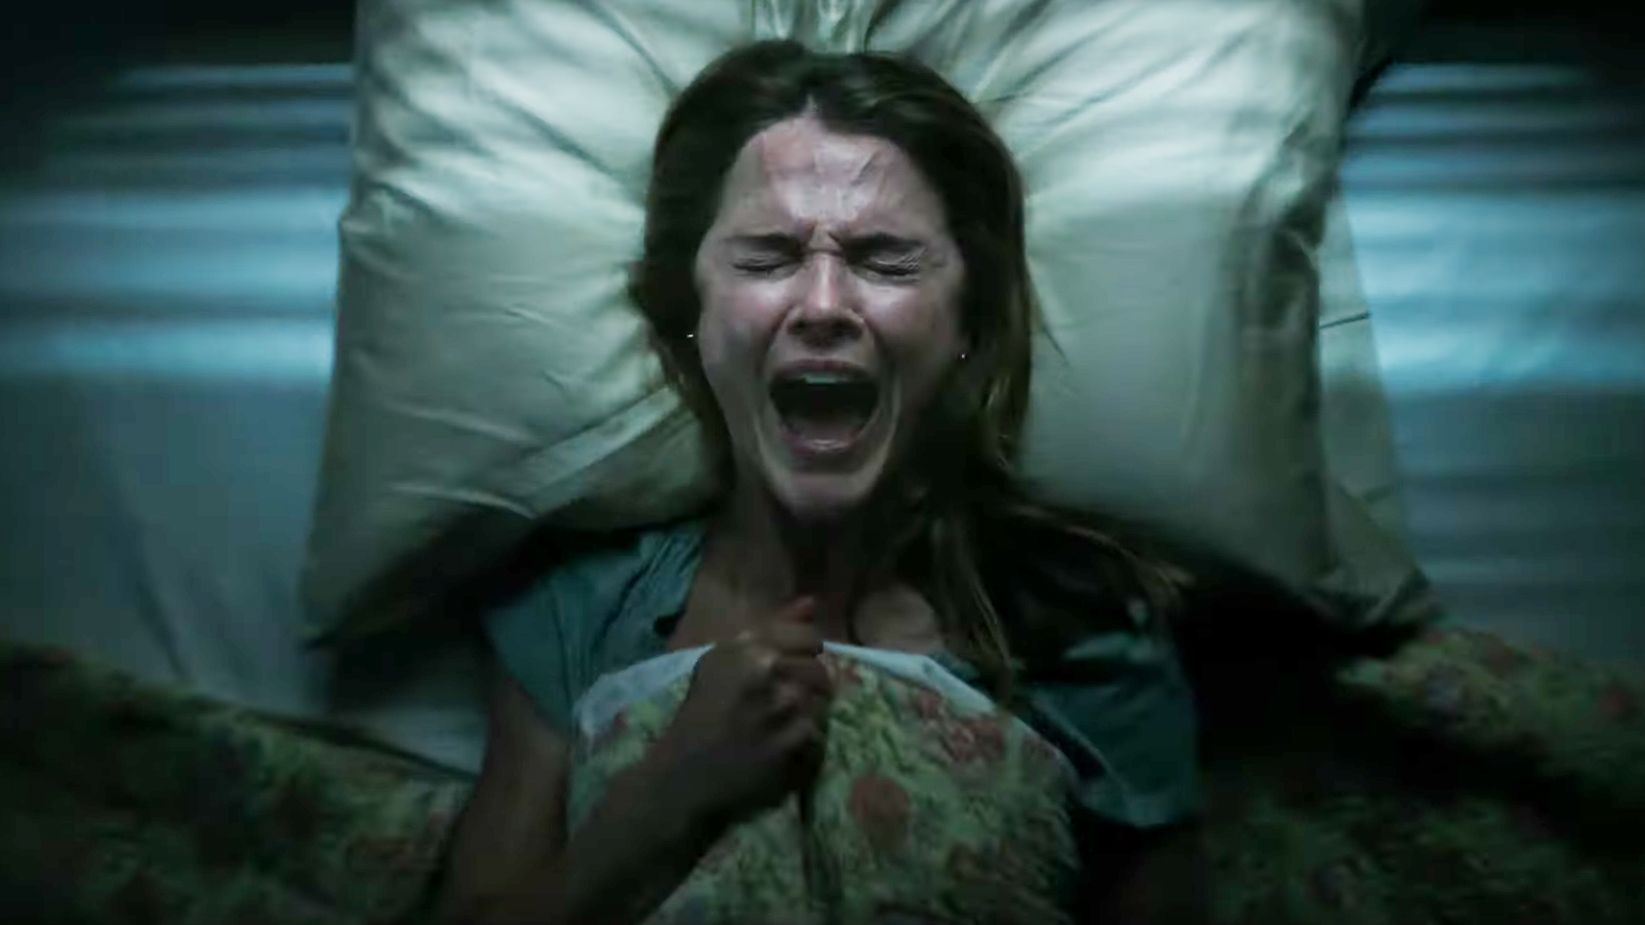 Guillermo Del Toro’s ‘Antlers’ Starring Keri Russell Drops Chilling First Trailer